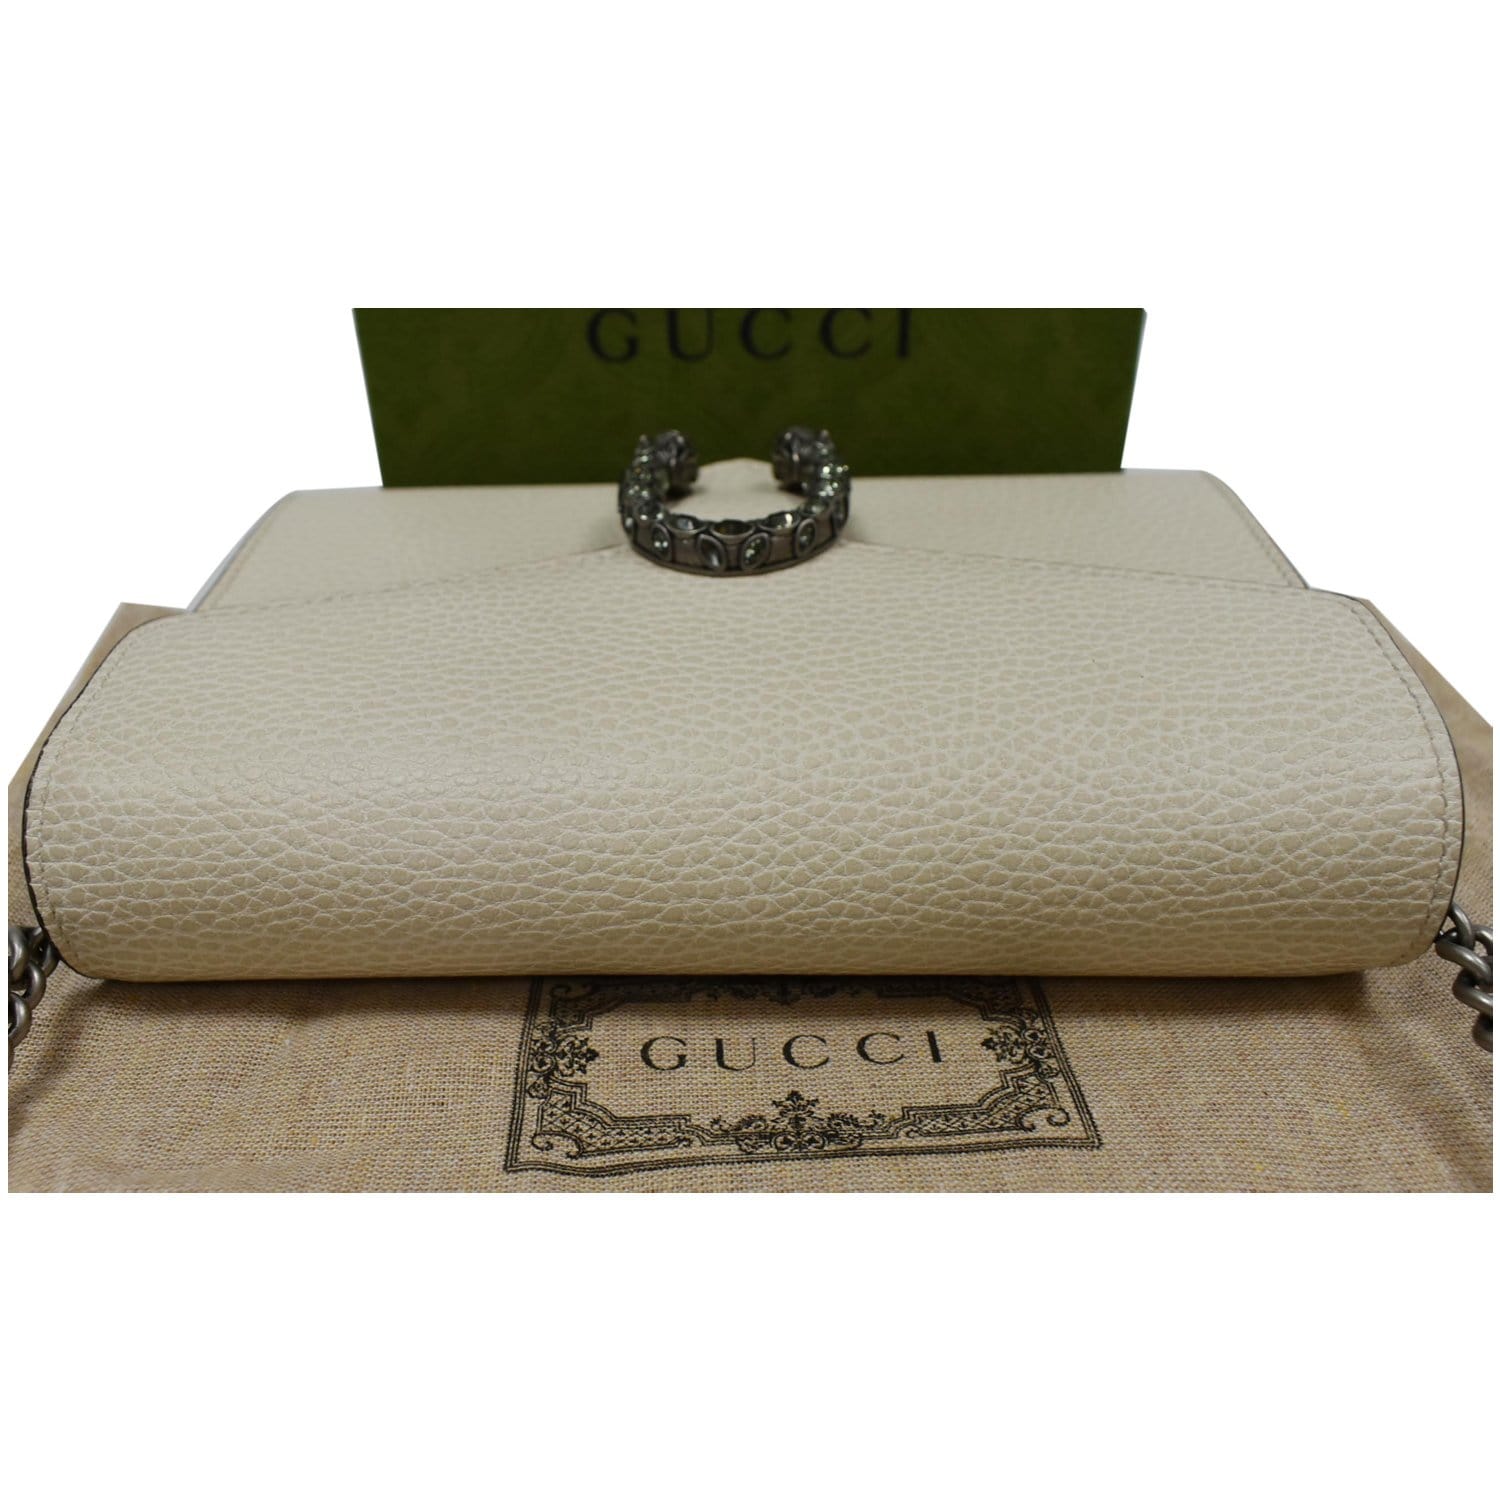 Gucci White Leather Dionysus Woc